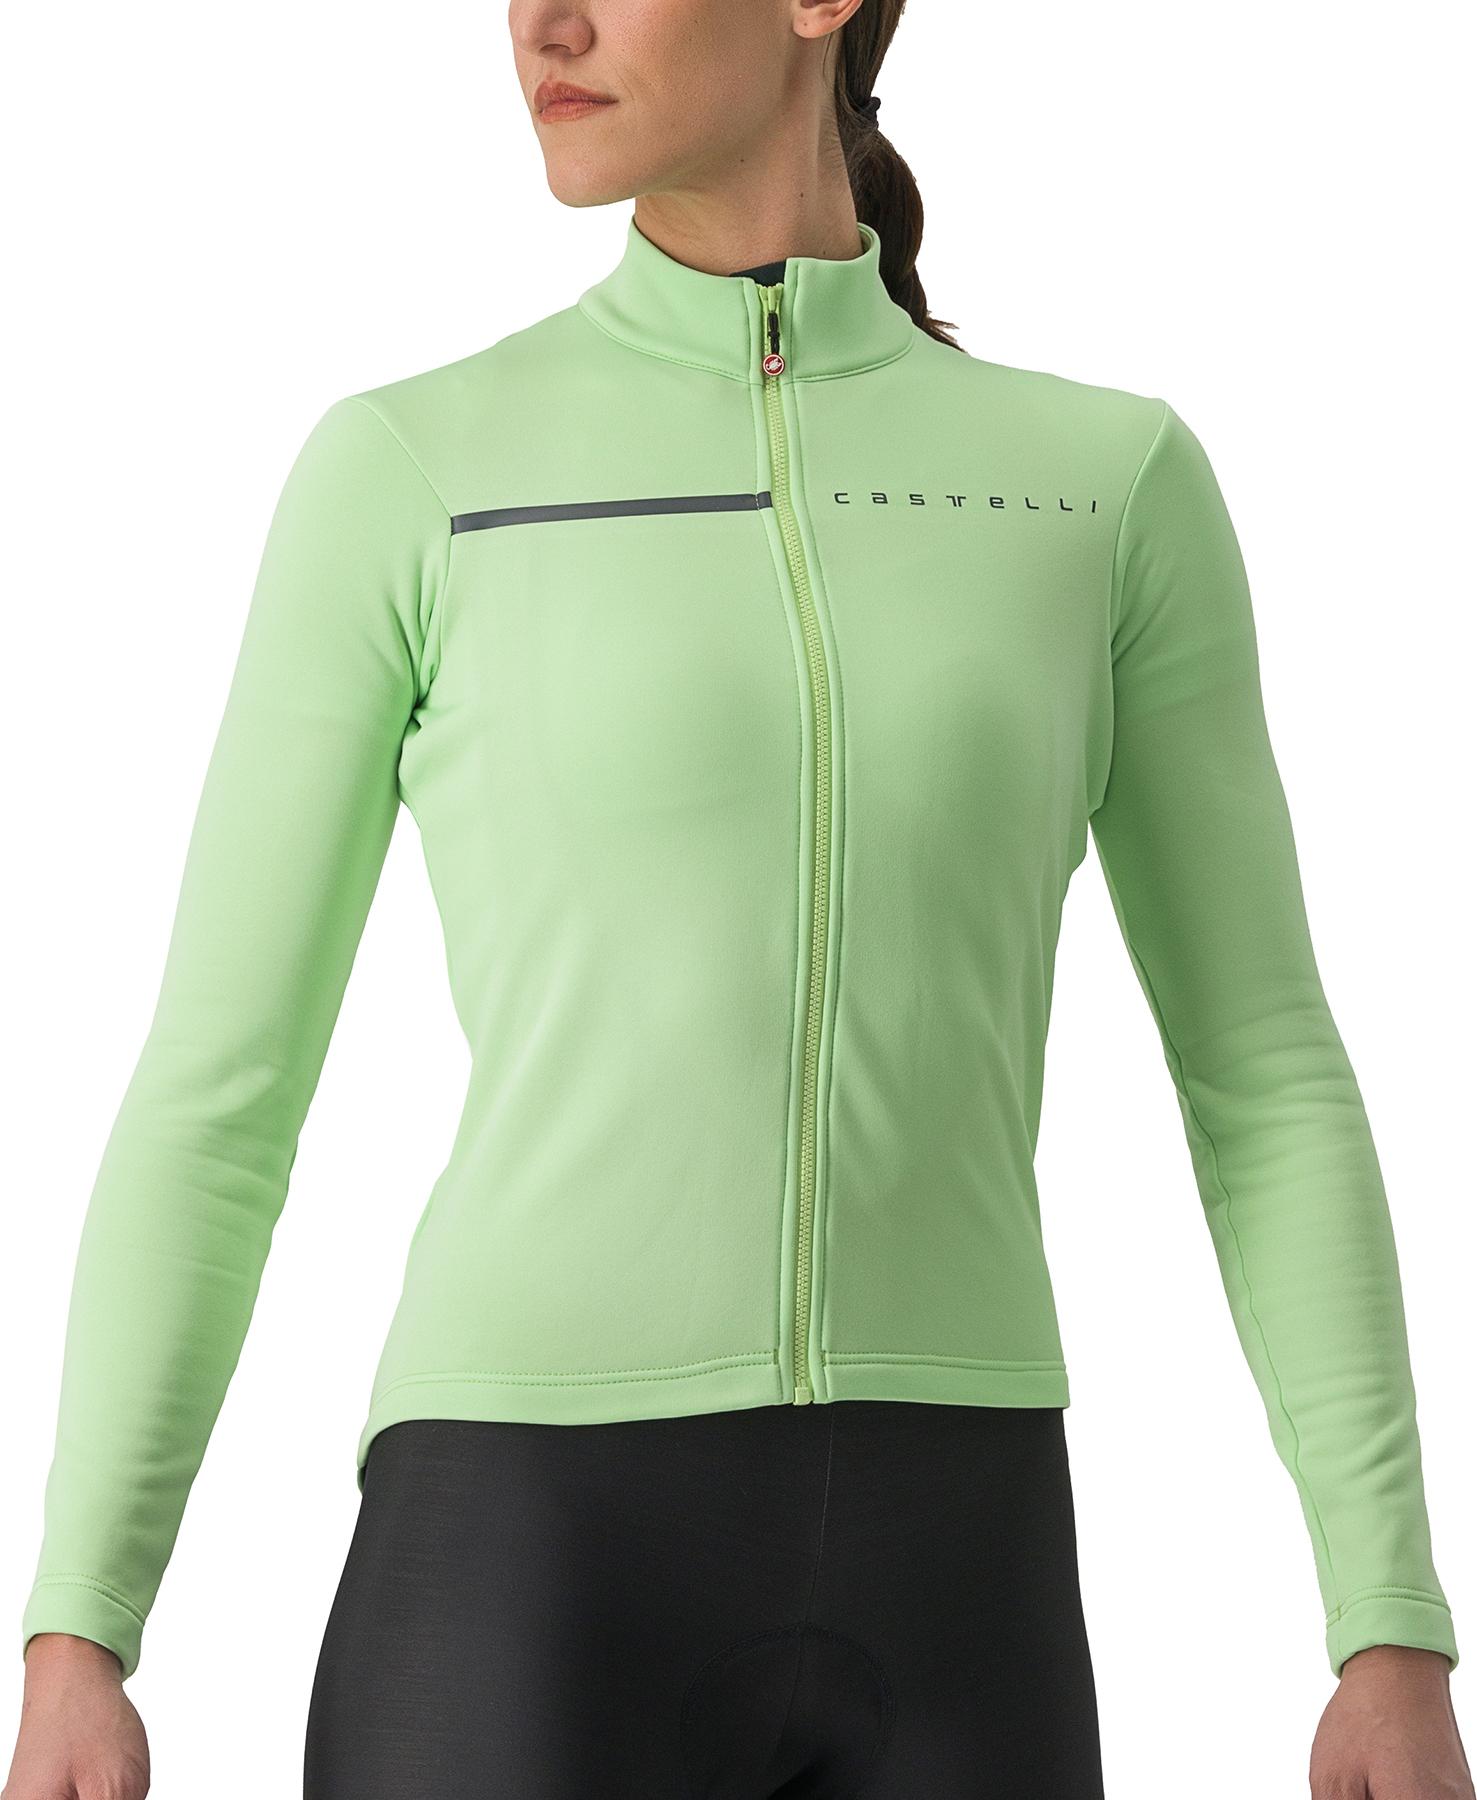 Castelli Womens Sinergia Long Sleeve Jersey - Paradise Mint/rover Green